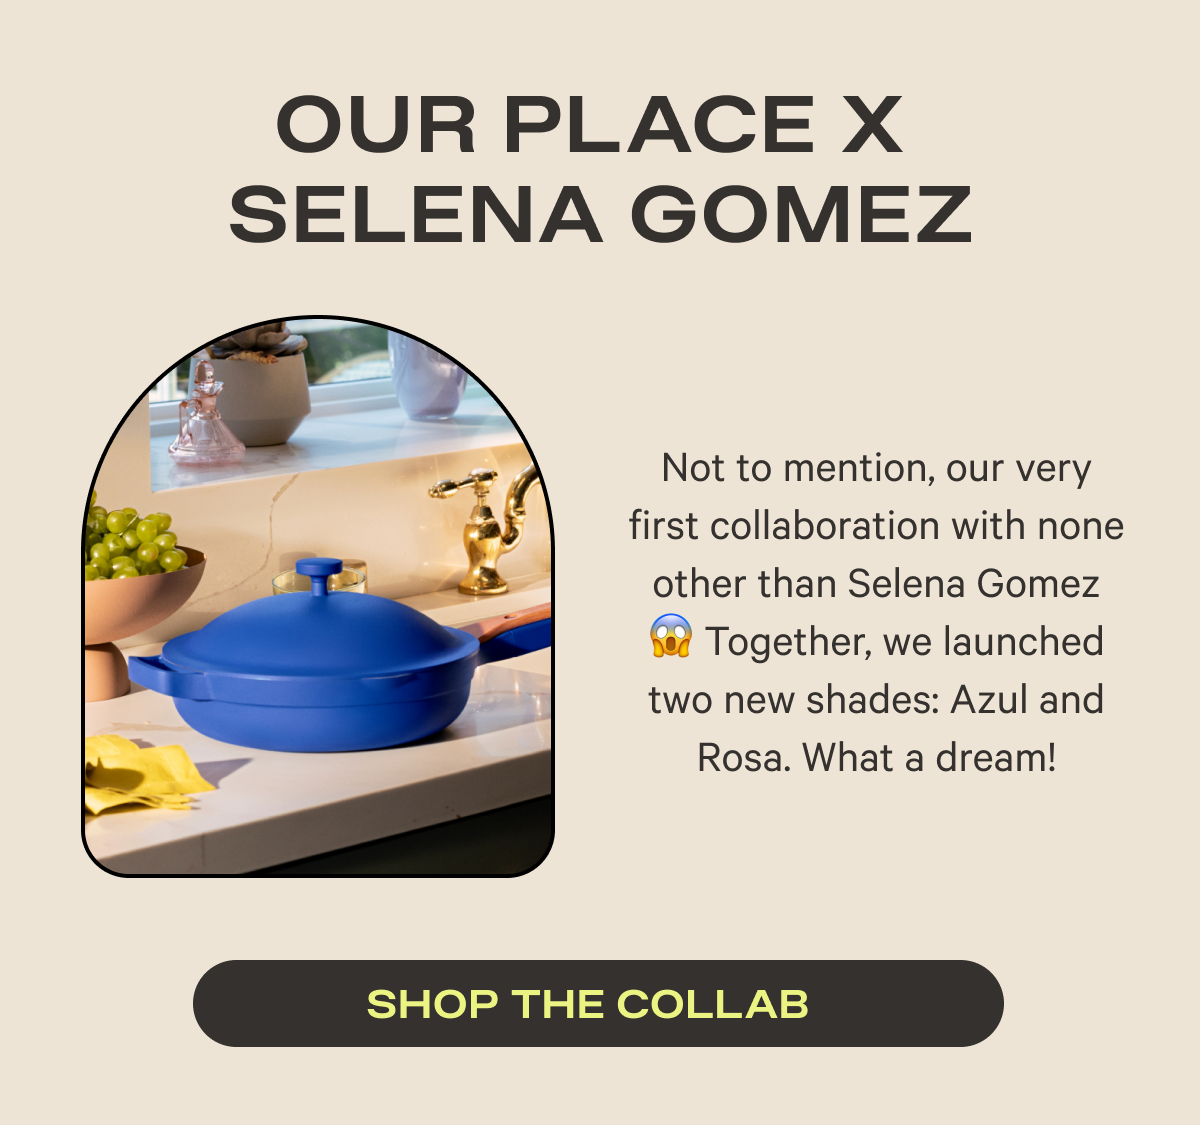 Our Place x Selena Gomez | Not to mention, our very first collaboration with none other than Selena Gomez 😱 Together, we launched two new shades: Azul and Rosa. What a dream!